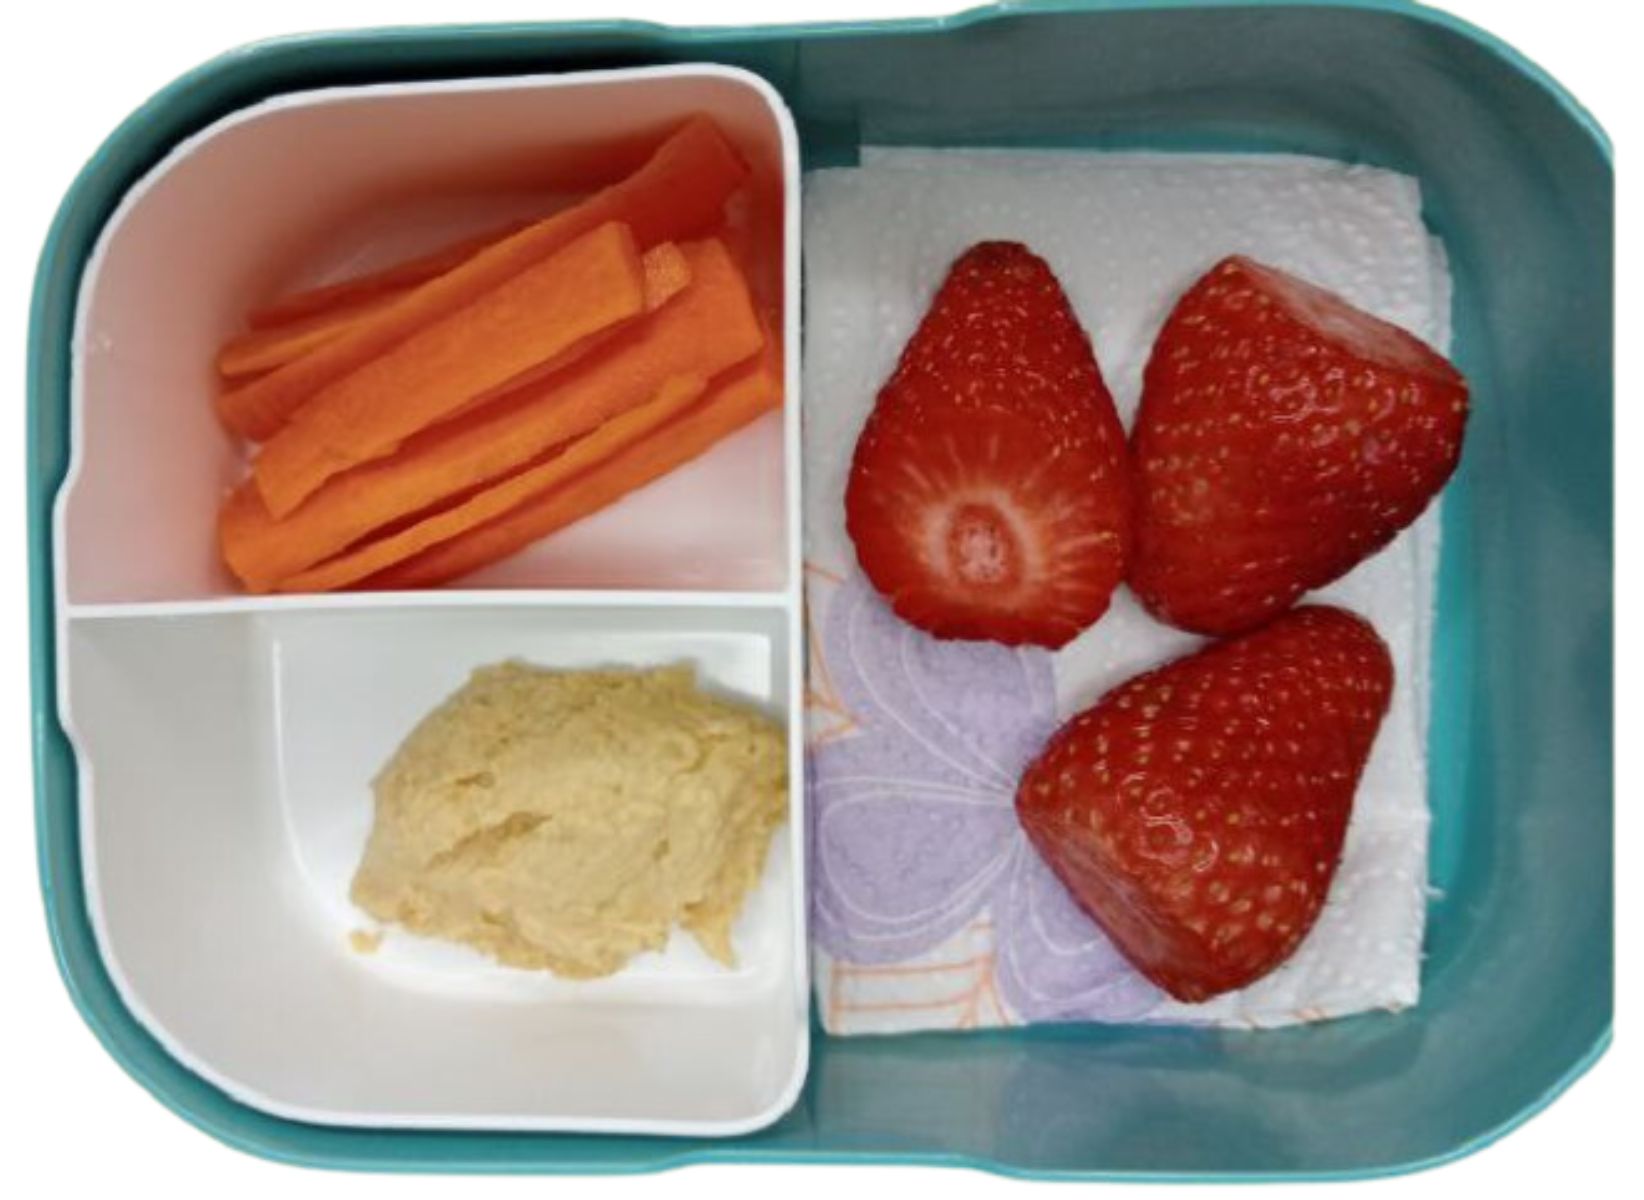 Sliced-carrot-hummus-and-whole-strawberries